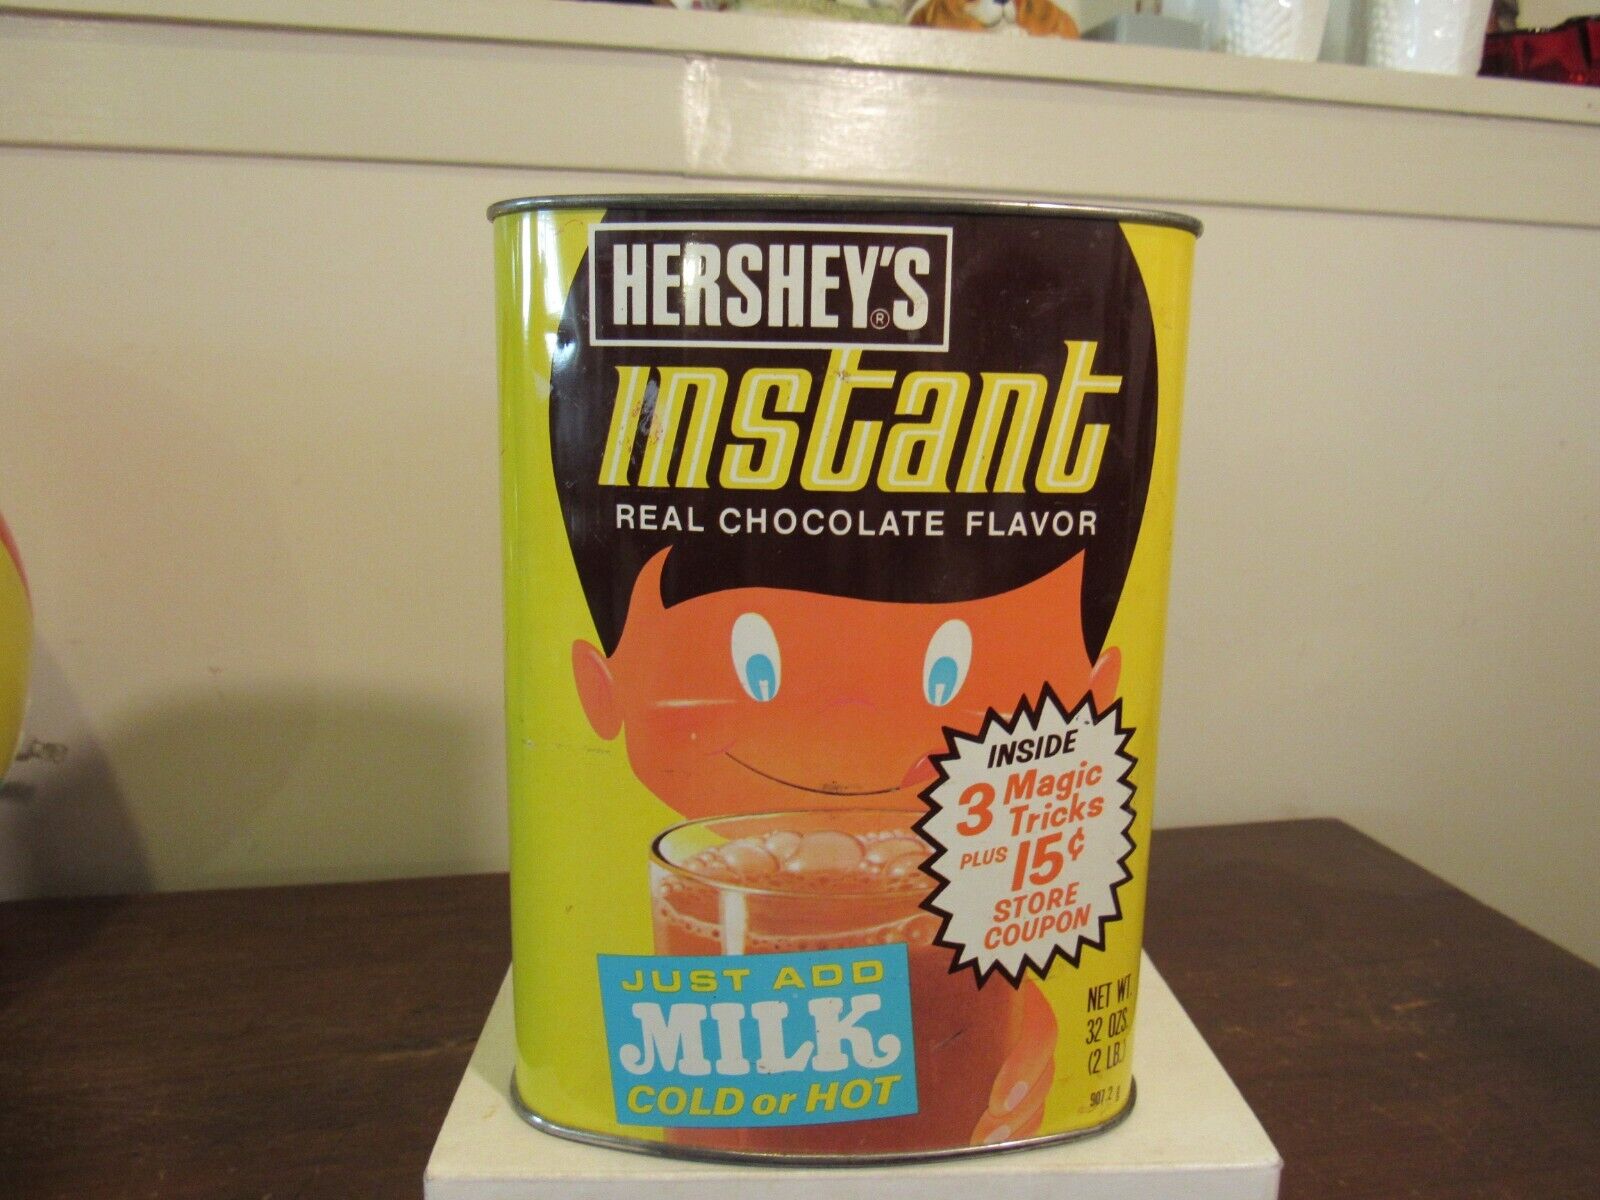 Vintage Hershey's Instant Real Chocolate Flavor 32 oz. Tin